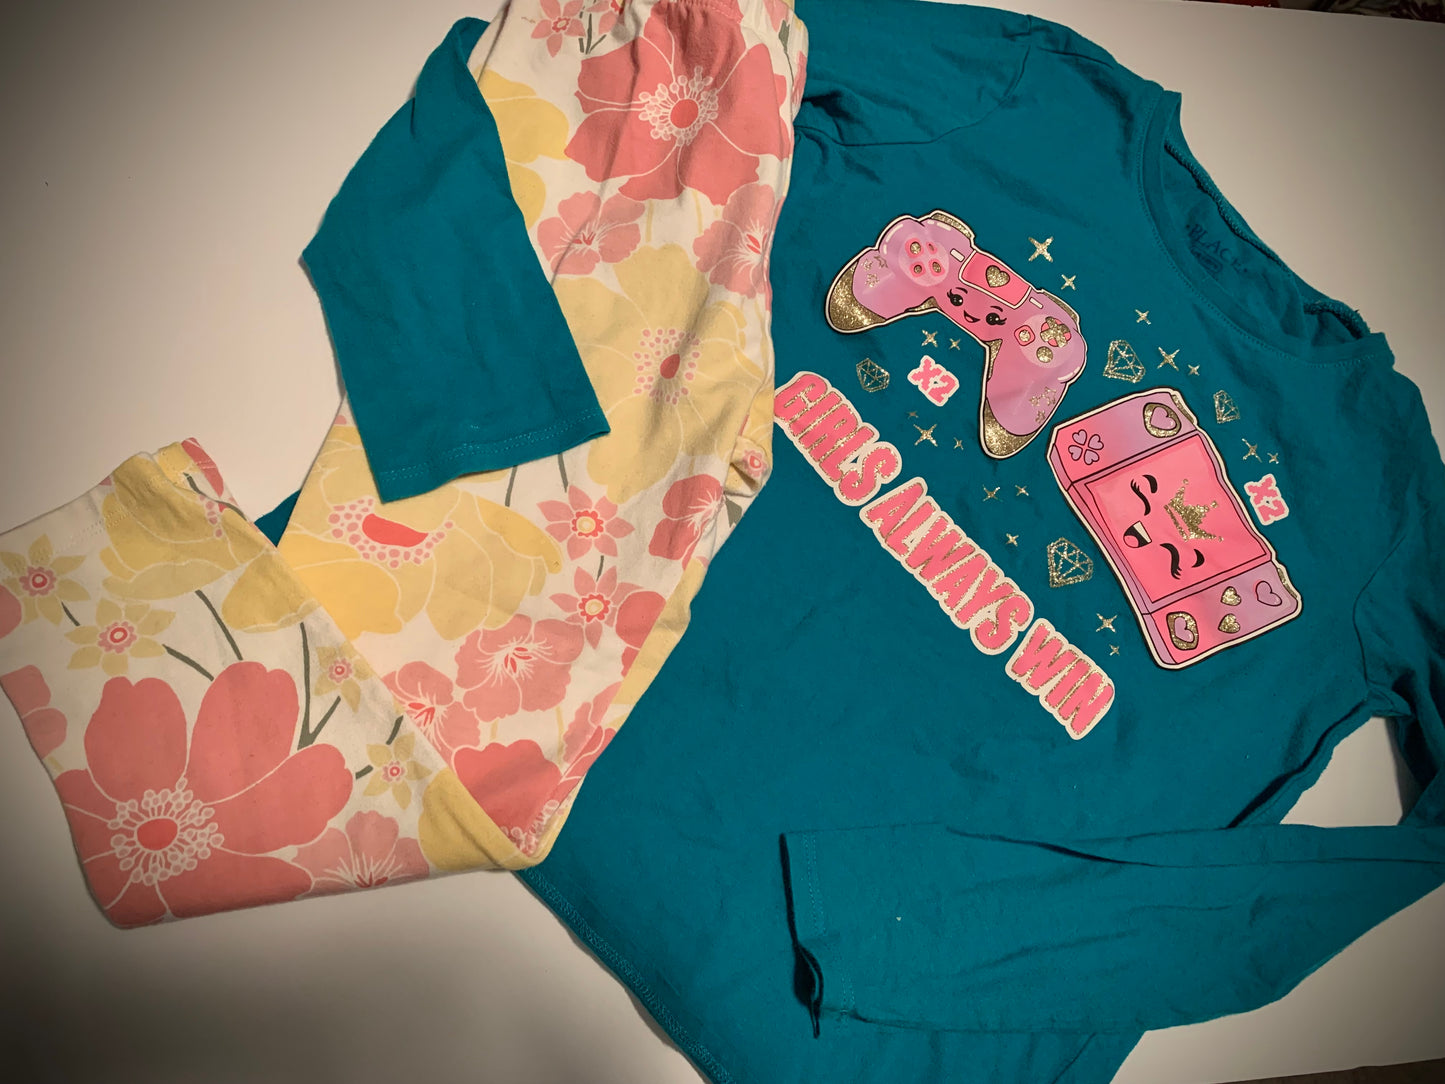 Girls size 10-12 Outfit- Floral Leggings and “Girls Always Win” gamer shirt